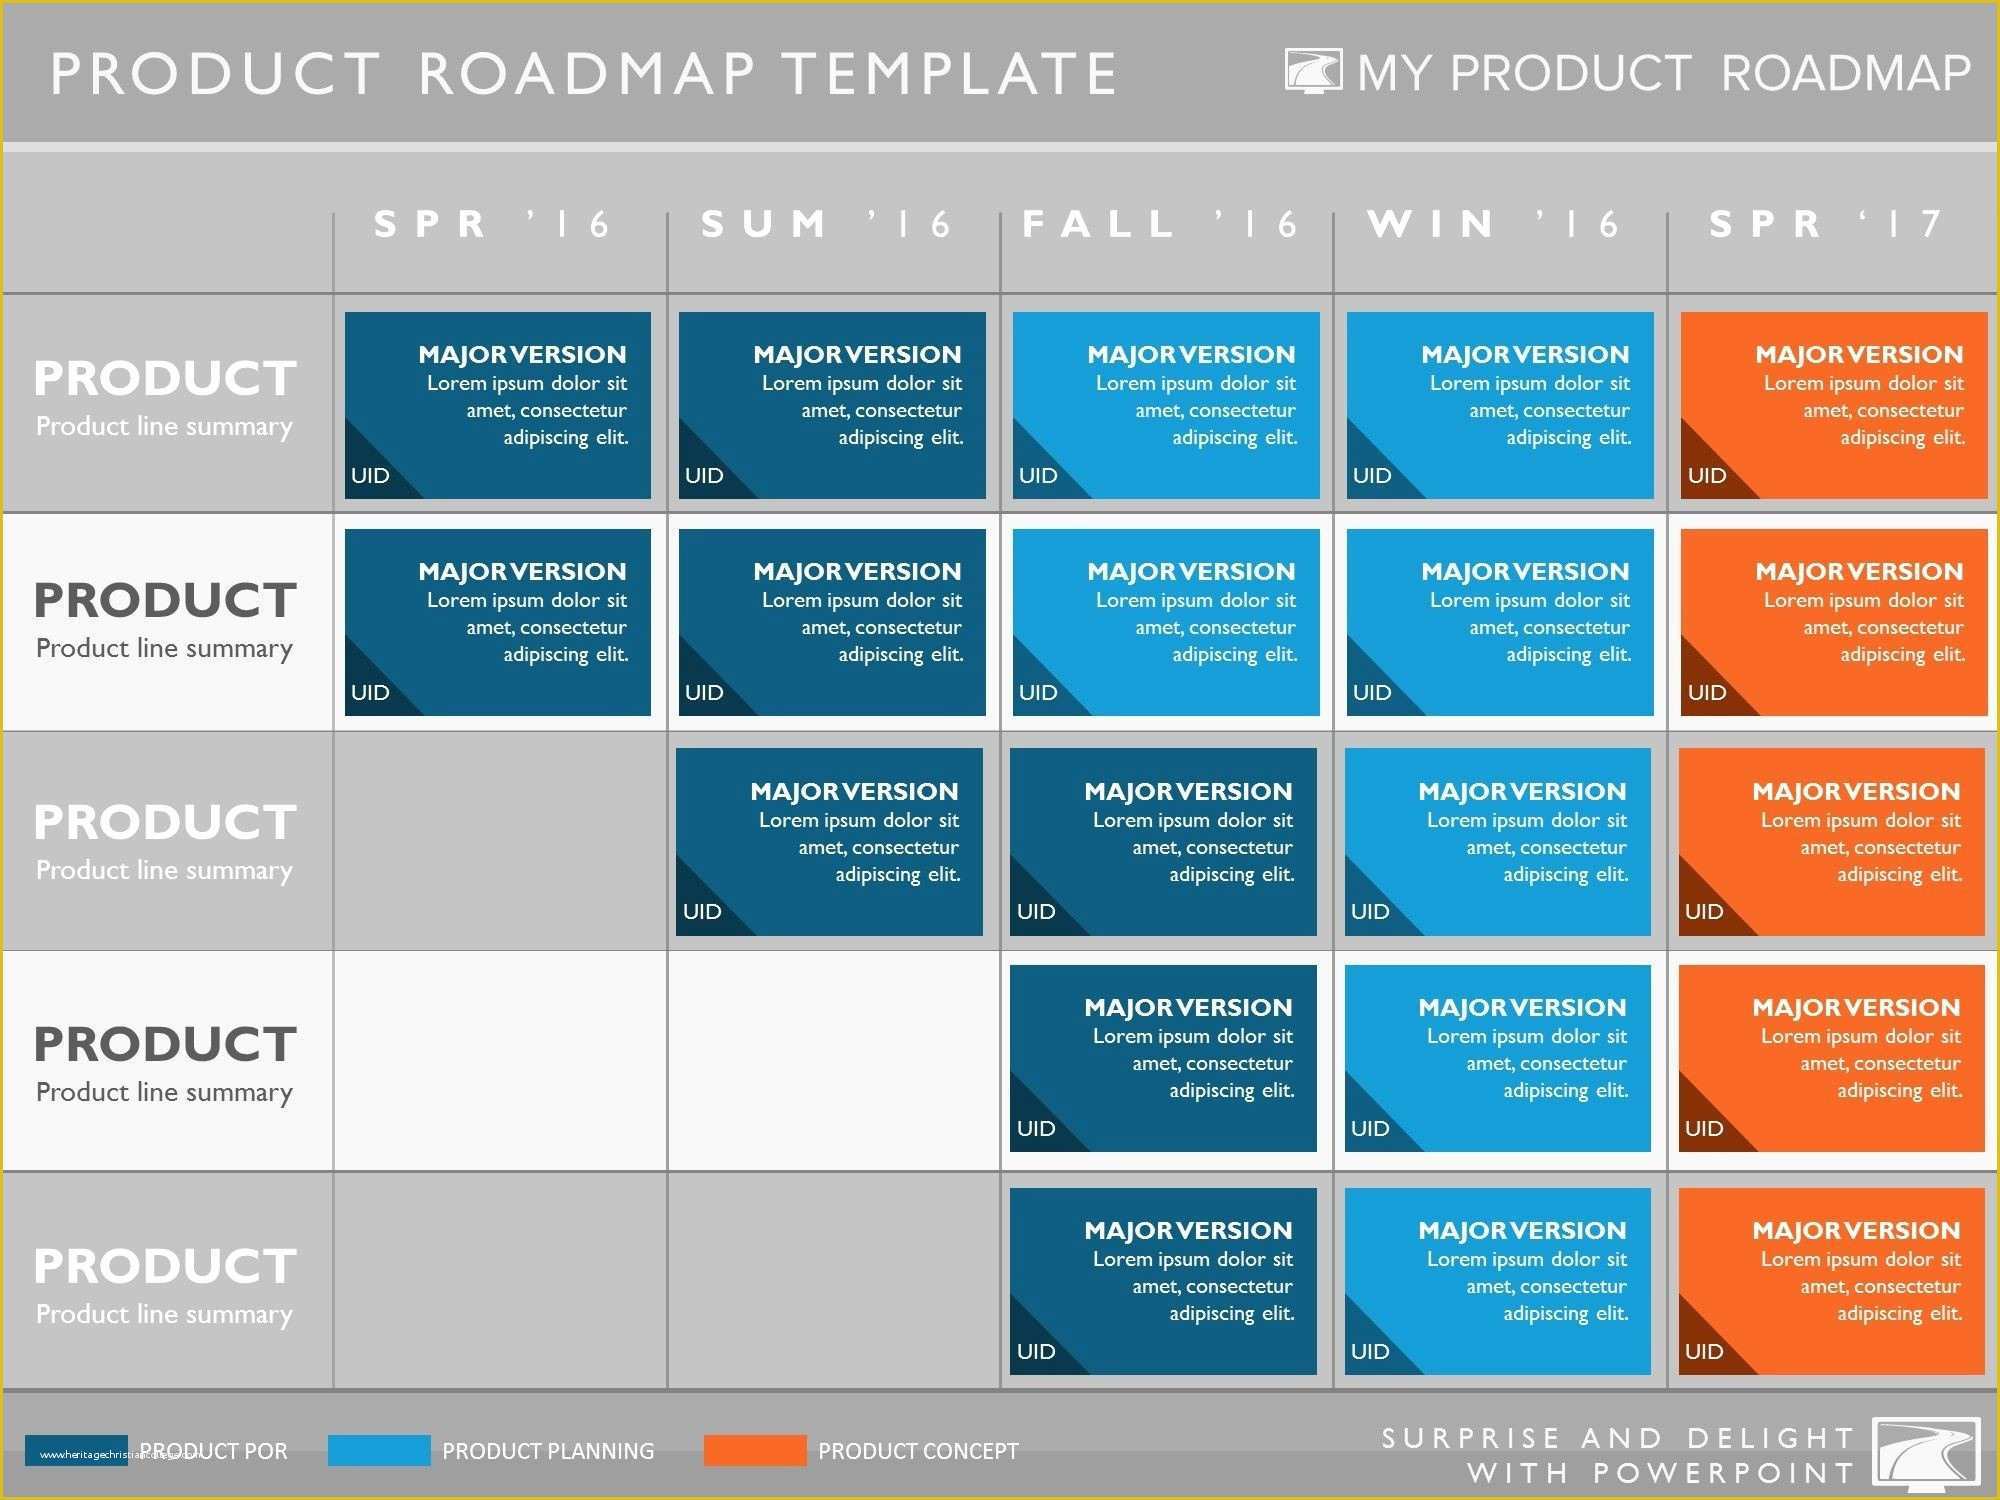 Product Roadmap Templates Powerpoint Download Free Of Roadmap Template Ppt Free Download Best Roadmap Templates